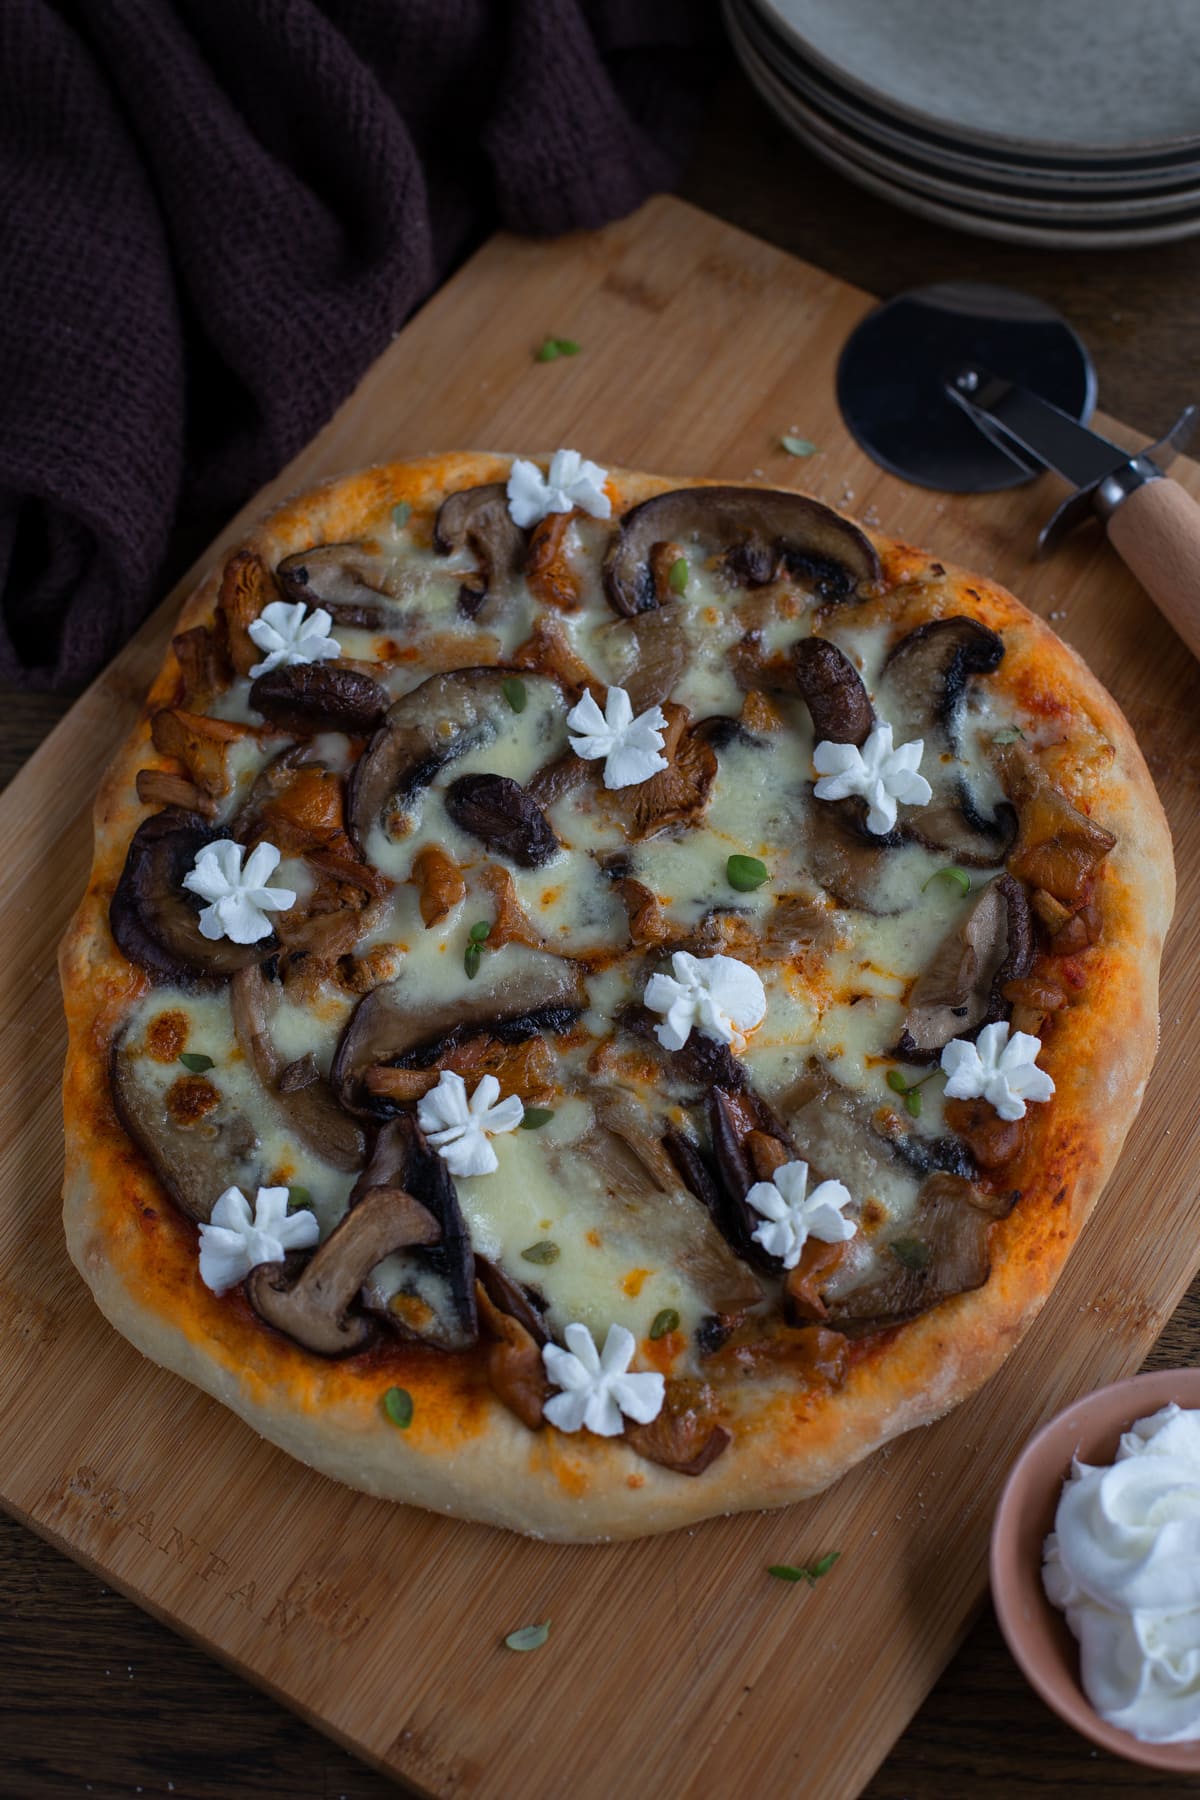 Mixed mushroom pizza topped with goat cheese.